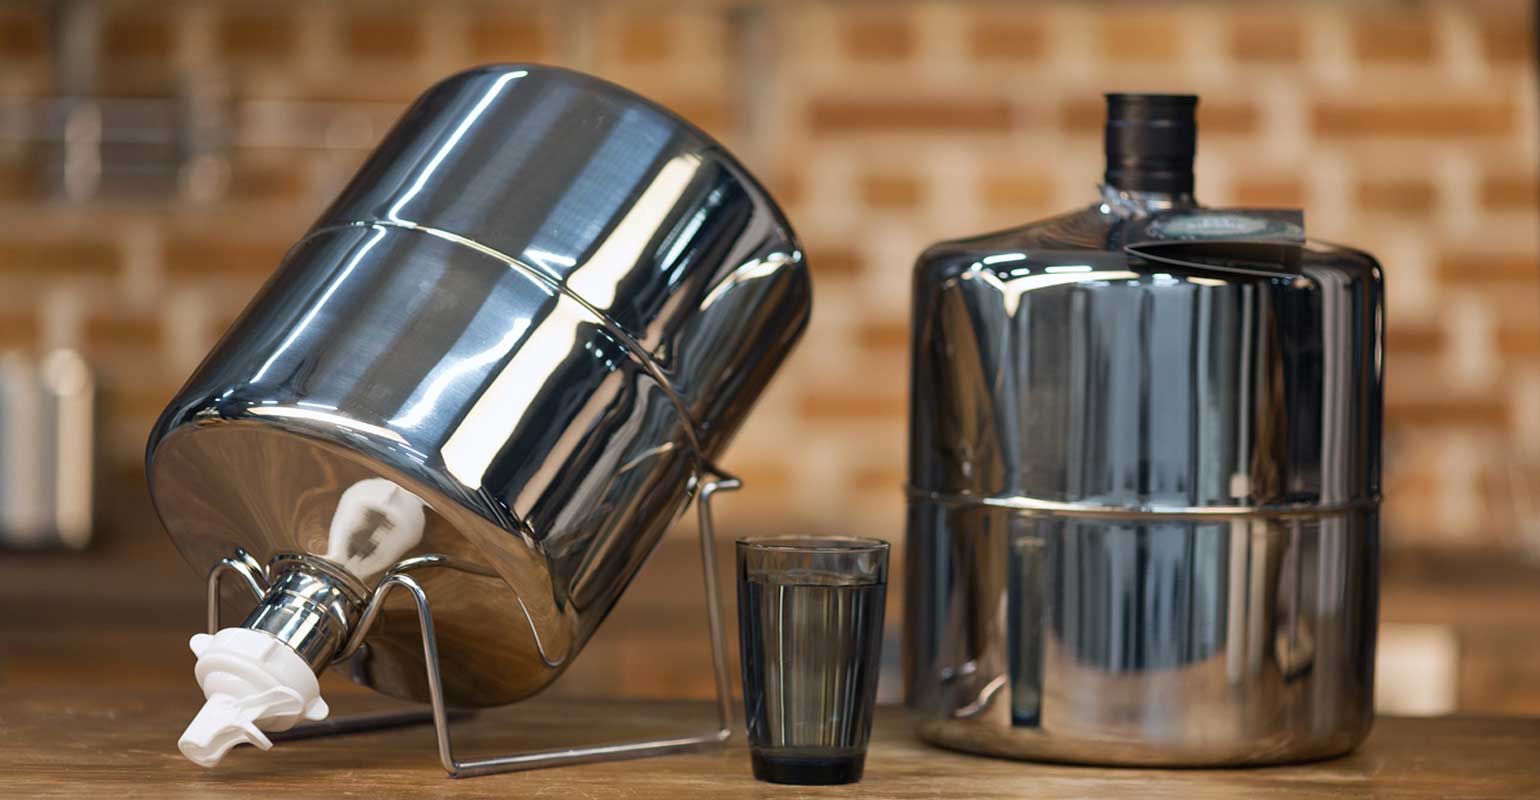 Bottles which are made of stainless steel has been assumed as a long lasting and hygienic option